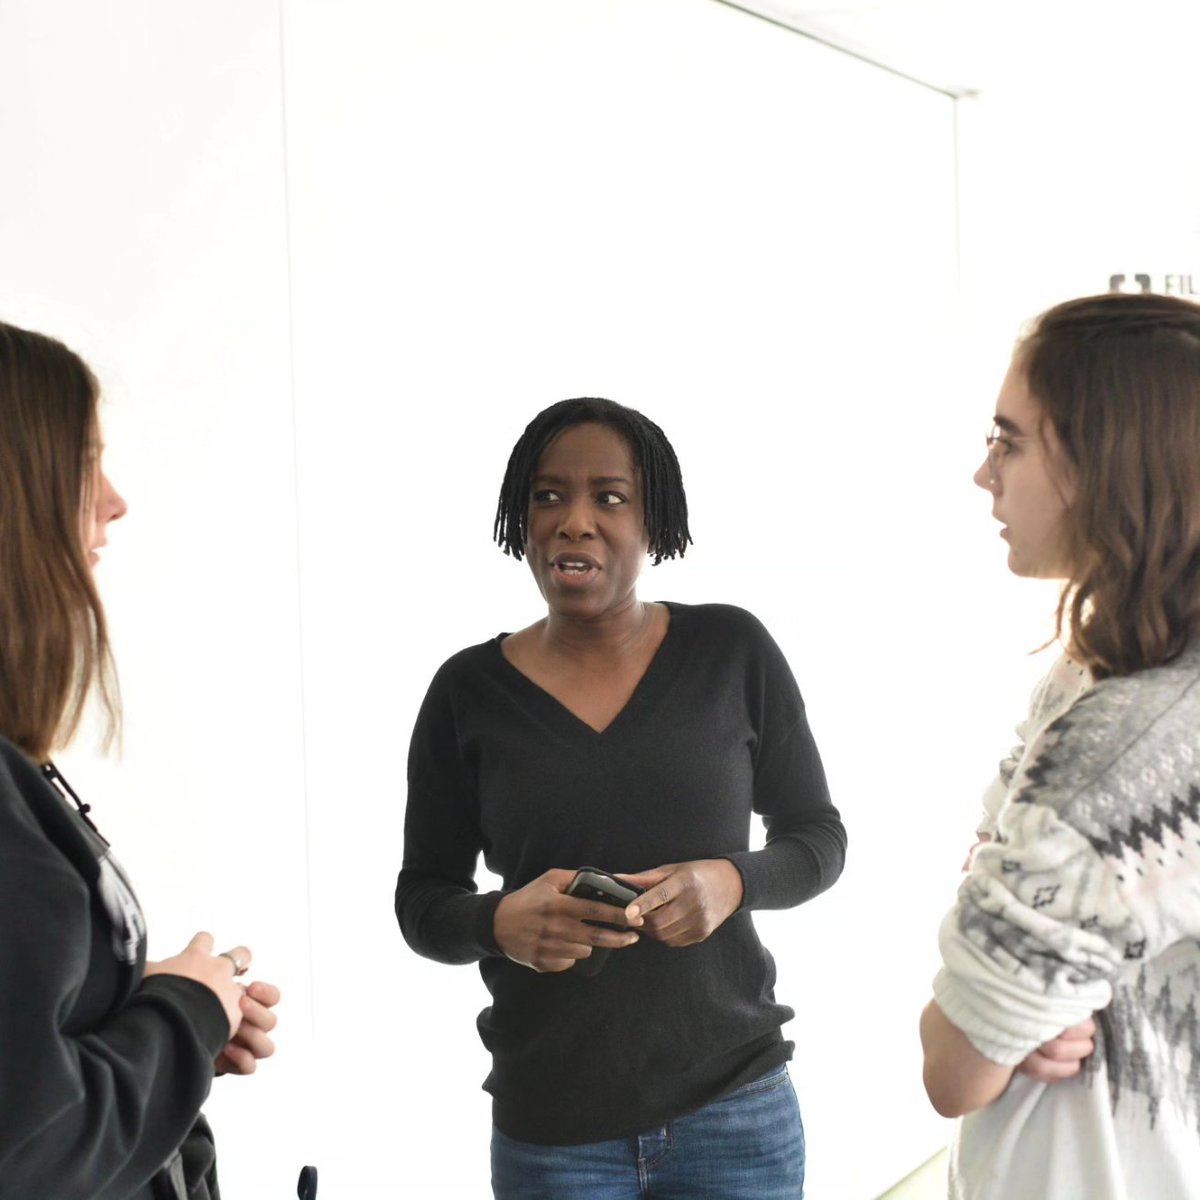 Learners at Film Academy Milton Keynes had the unique opportunity to meet the current head of the British Film Institute (BFI) Film Academy to discuss routes and opportunities for career progression. 
#filmmaking #accreditedtraining #BFI #nurturingcreativity